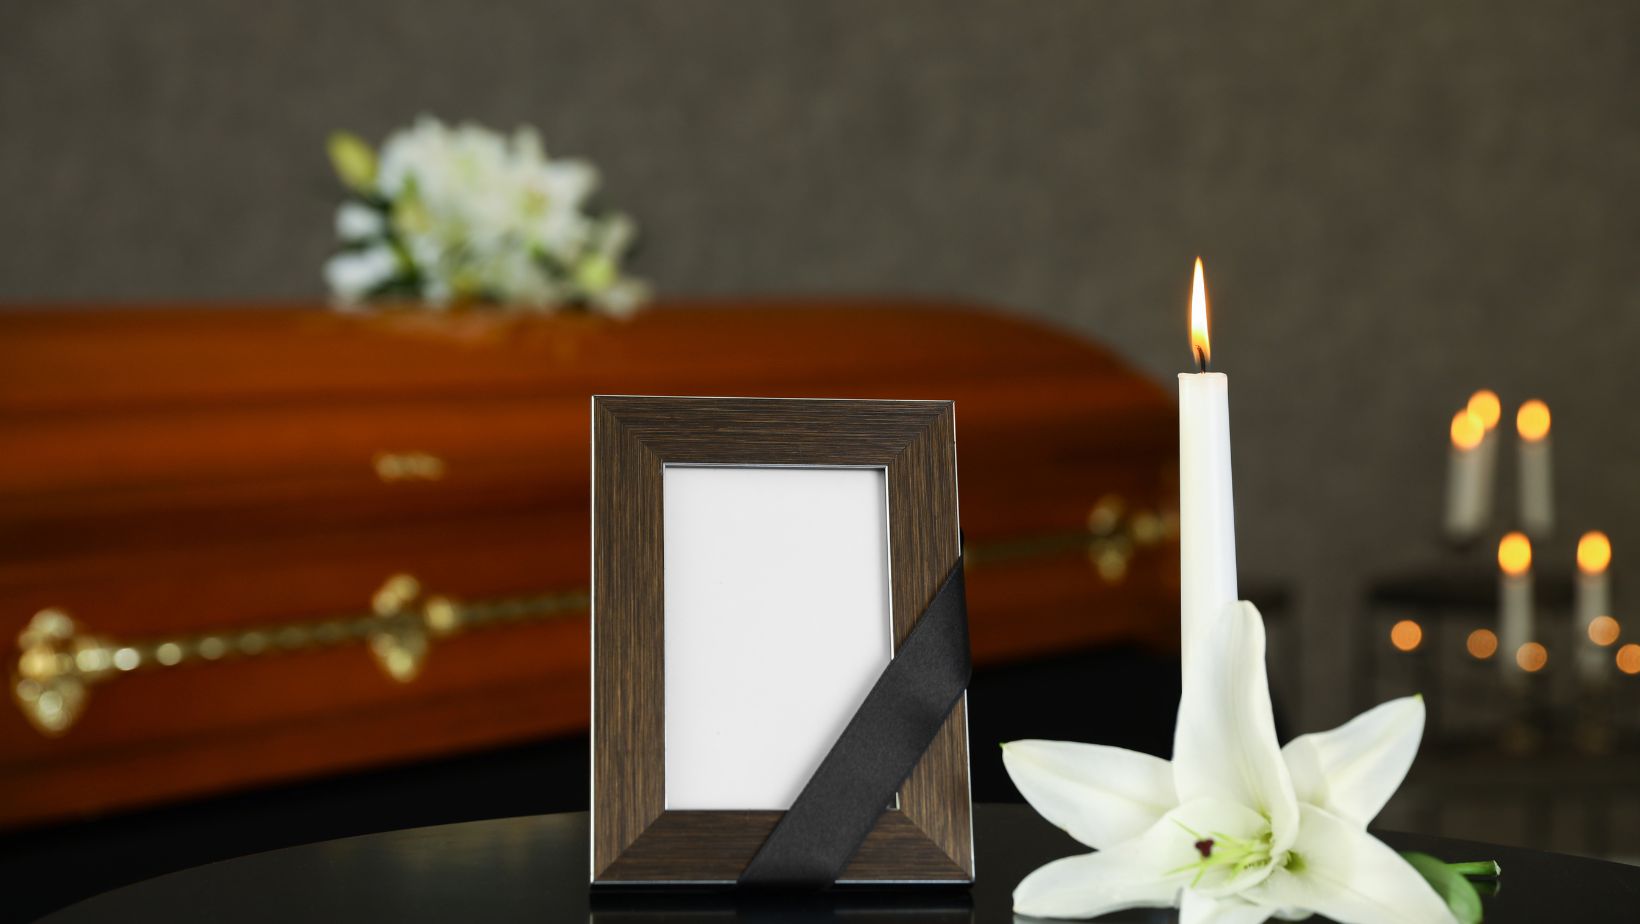 perry-mcstay funeral home obituaries